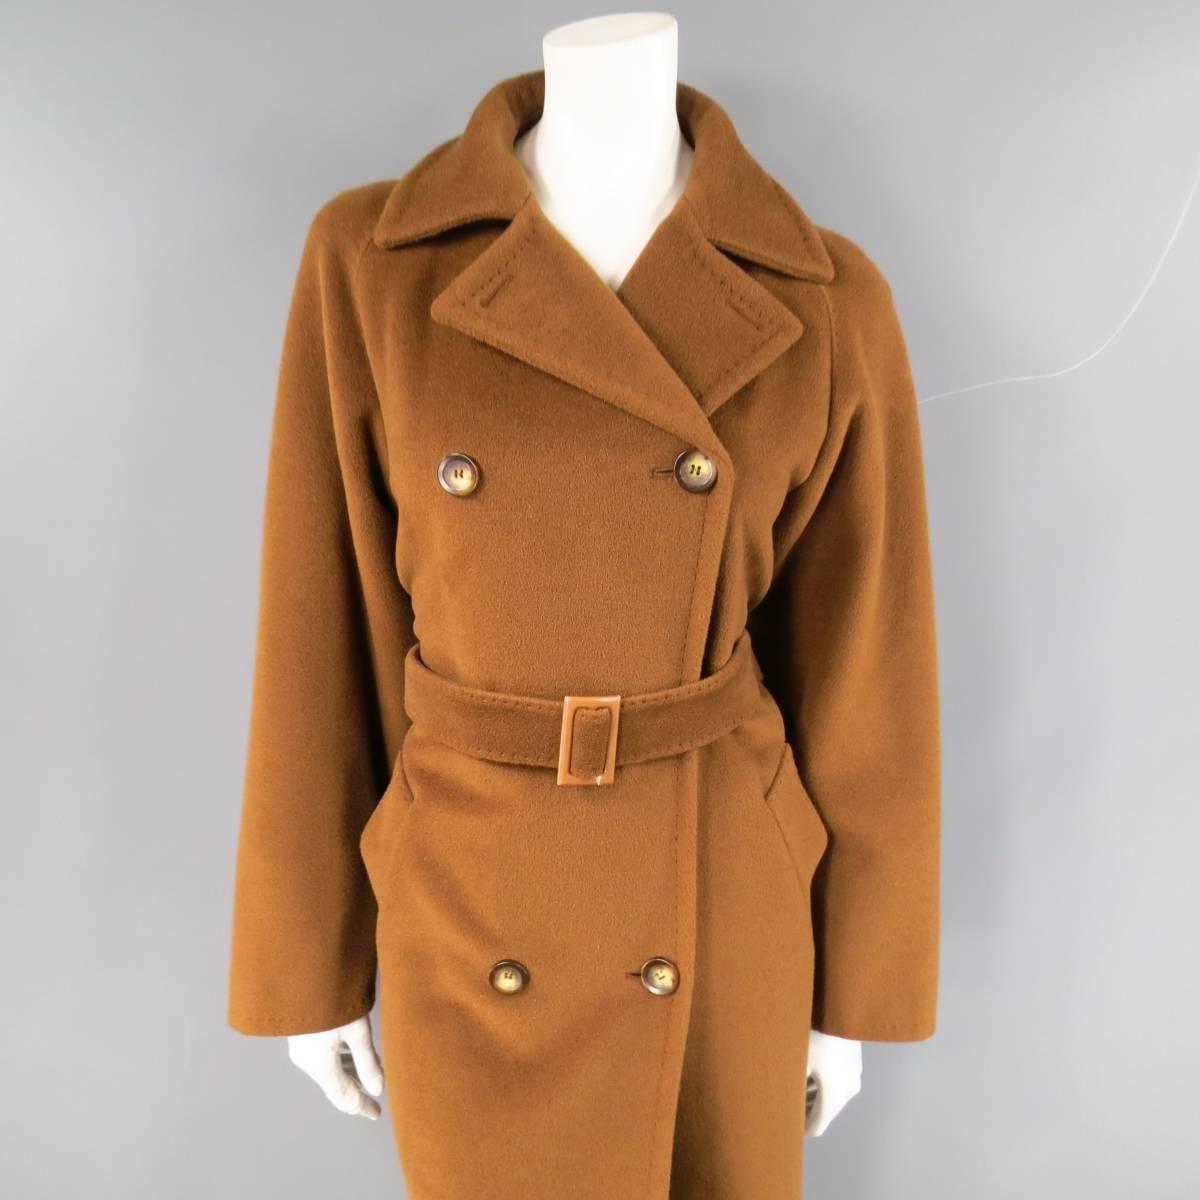 This gorgeous vintage MAX MARA coat comes in a light brown soft virgin wool cashmere blend and features a pointed lapel with top stitching, double breasted button up closure, raglan sleeves, and matching fabric belt. Made in Italy.
 
Excellent